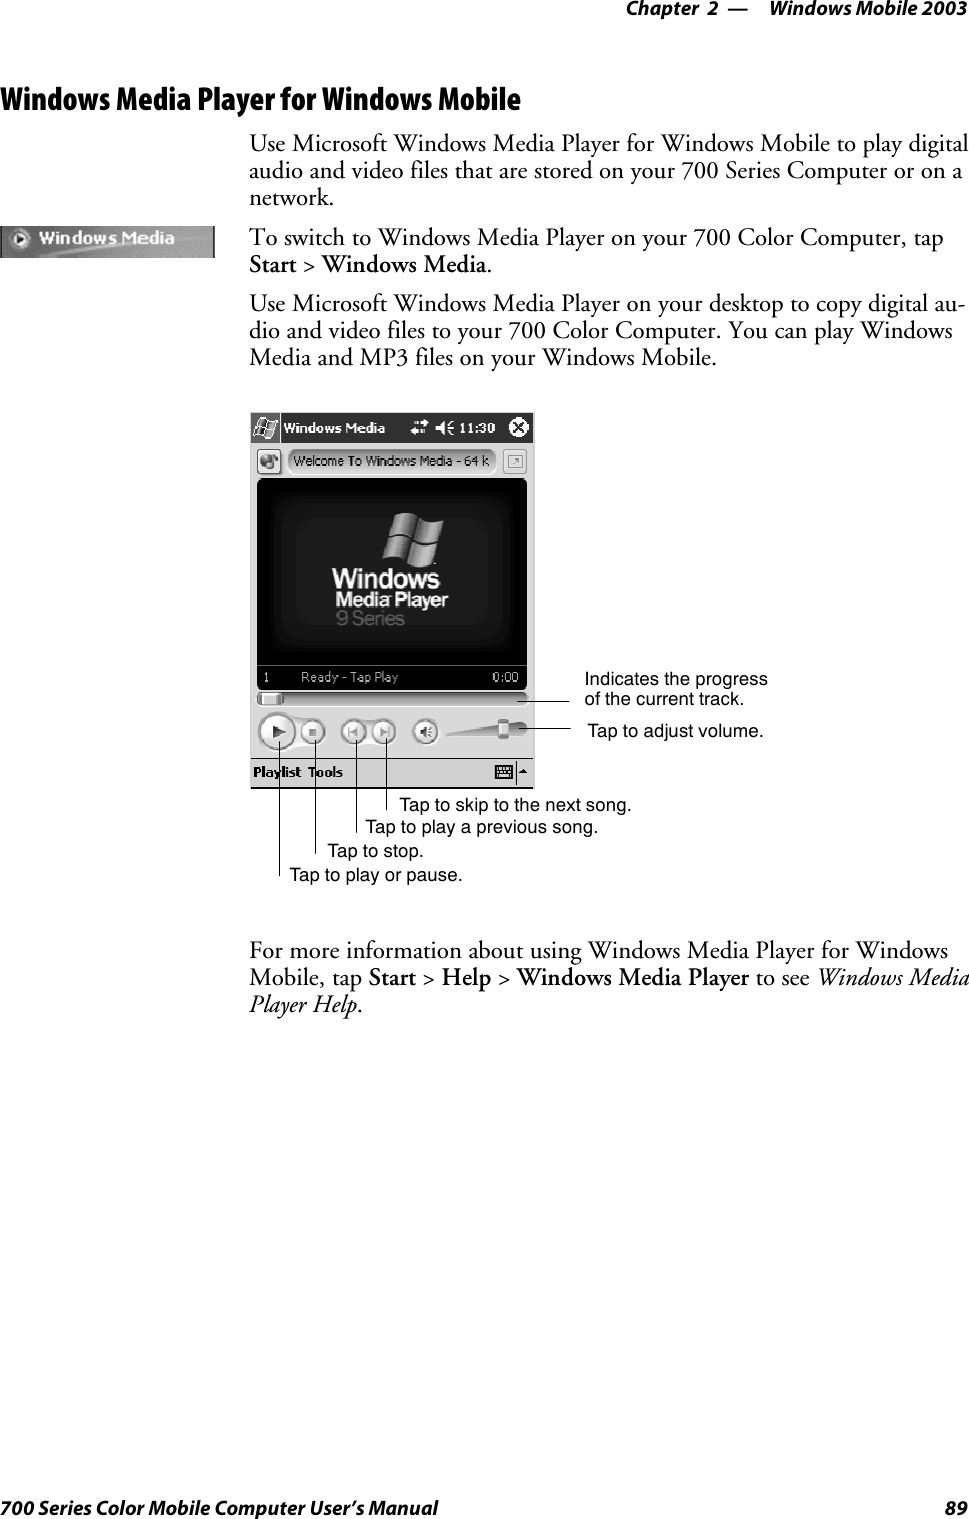 Windows Mobile 2003—Chapter 289700 Series Color Mobile Computer User’s ManualWindows Media Player for Windows MobileUse Microsoft Windows Media Player for Windows Mobile to play digitalaudio and video files that are stored on your 700 Series Computer or on anetwork.To switch to Windows Media Player on your 700 Color Computer, tapStart &gt;Windows Media.Use Microsoft Windows Media Player on your desktop to copy digital au-dio and video files to your 700 Color Computer. You can play WindowsMedia and MP3 files on your Windows Mobile.Indicates the progressof the current track.Tap to adjust volume.Tap to skip to the next song.Tap to play a previous song.Taptostop.Tap to play or pause.For more information about using Windows Media Player for WindowsMobile, tap Start &gt;Help &gt;Windows Media Player to see Windows MediaPlayer Help.